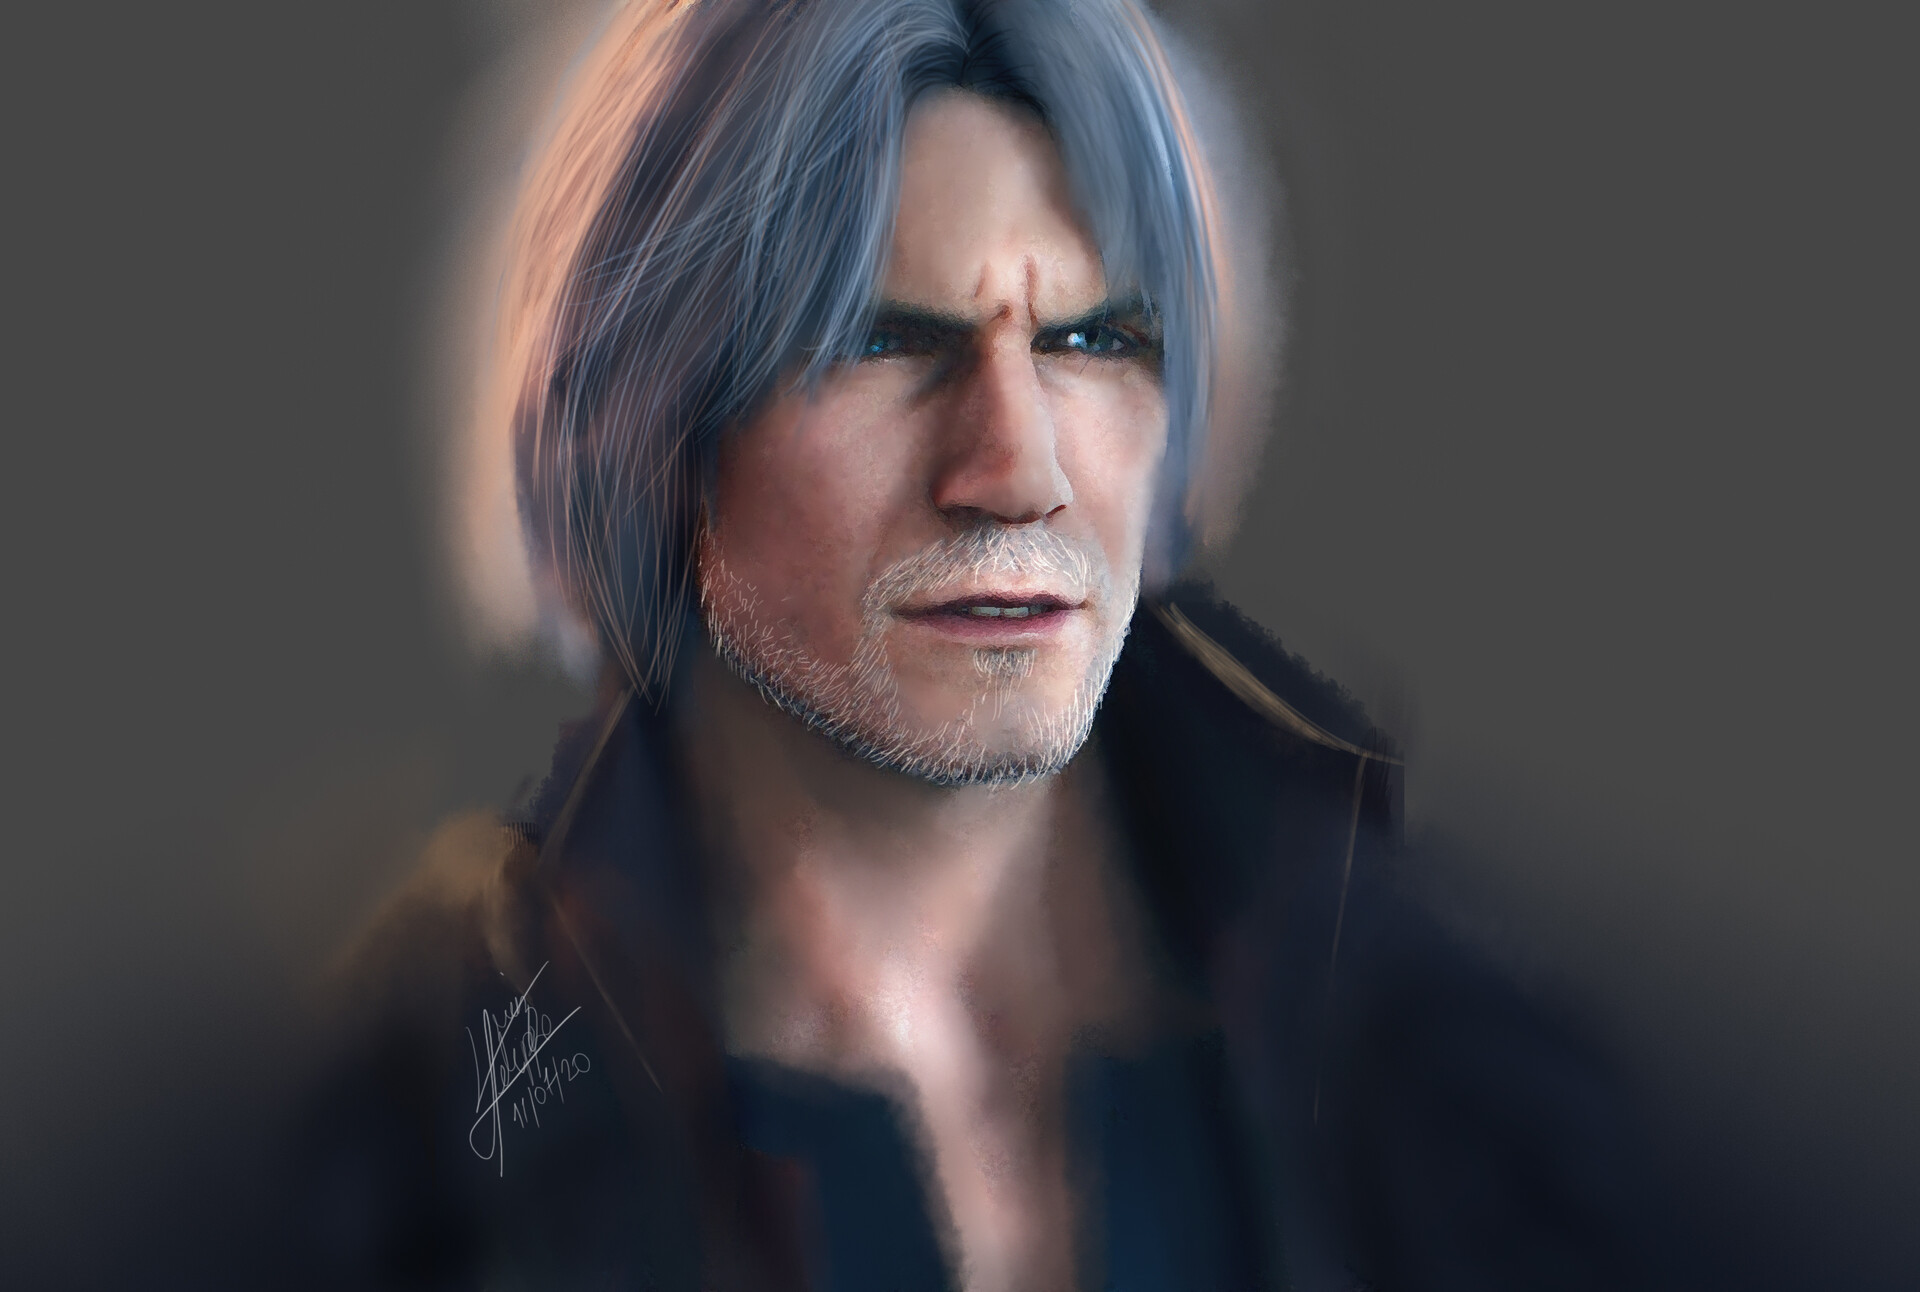 ArtStation - Hairstyle study - Dante, Devil May Cry